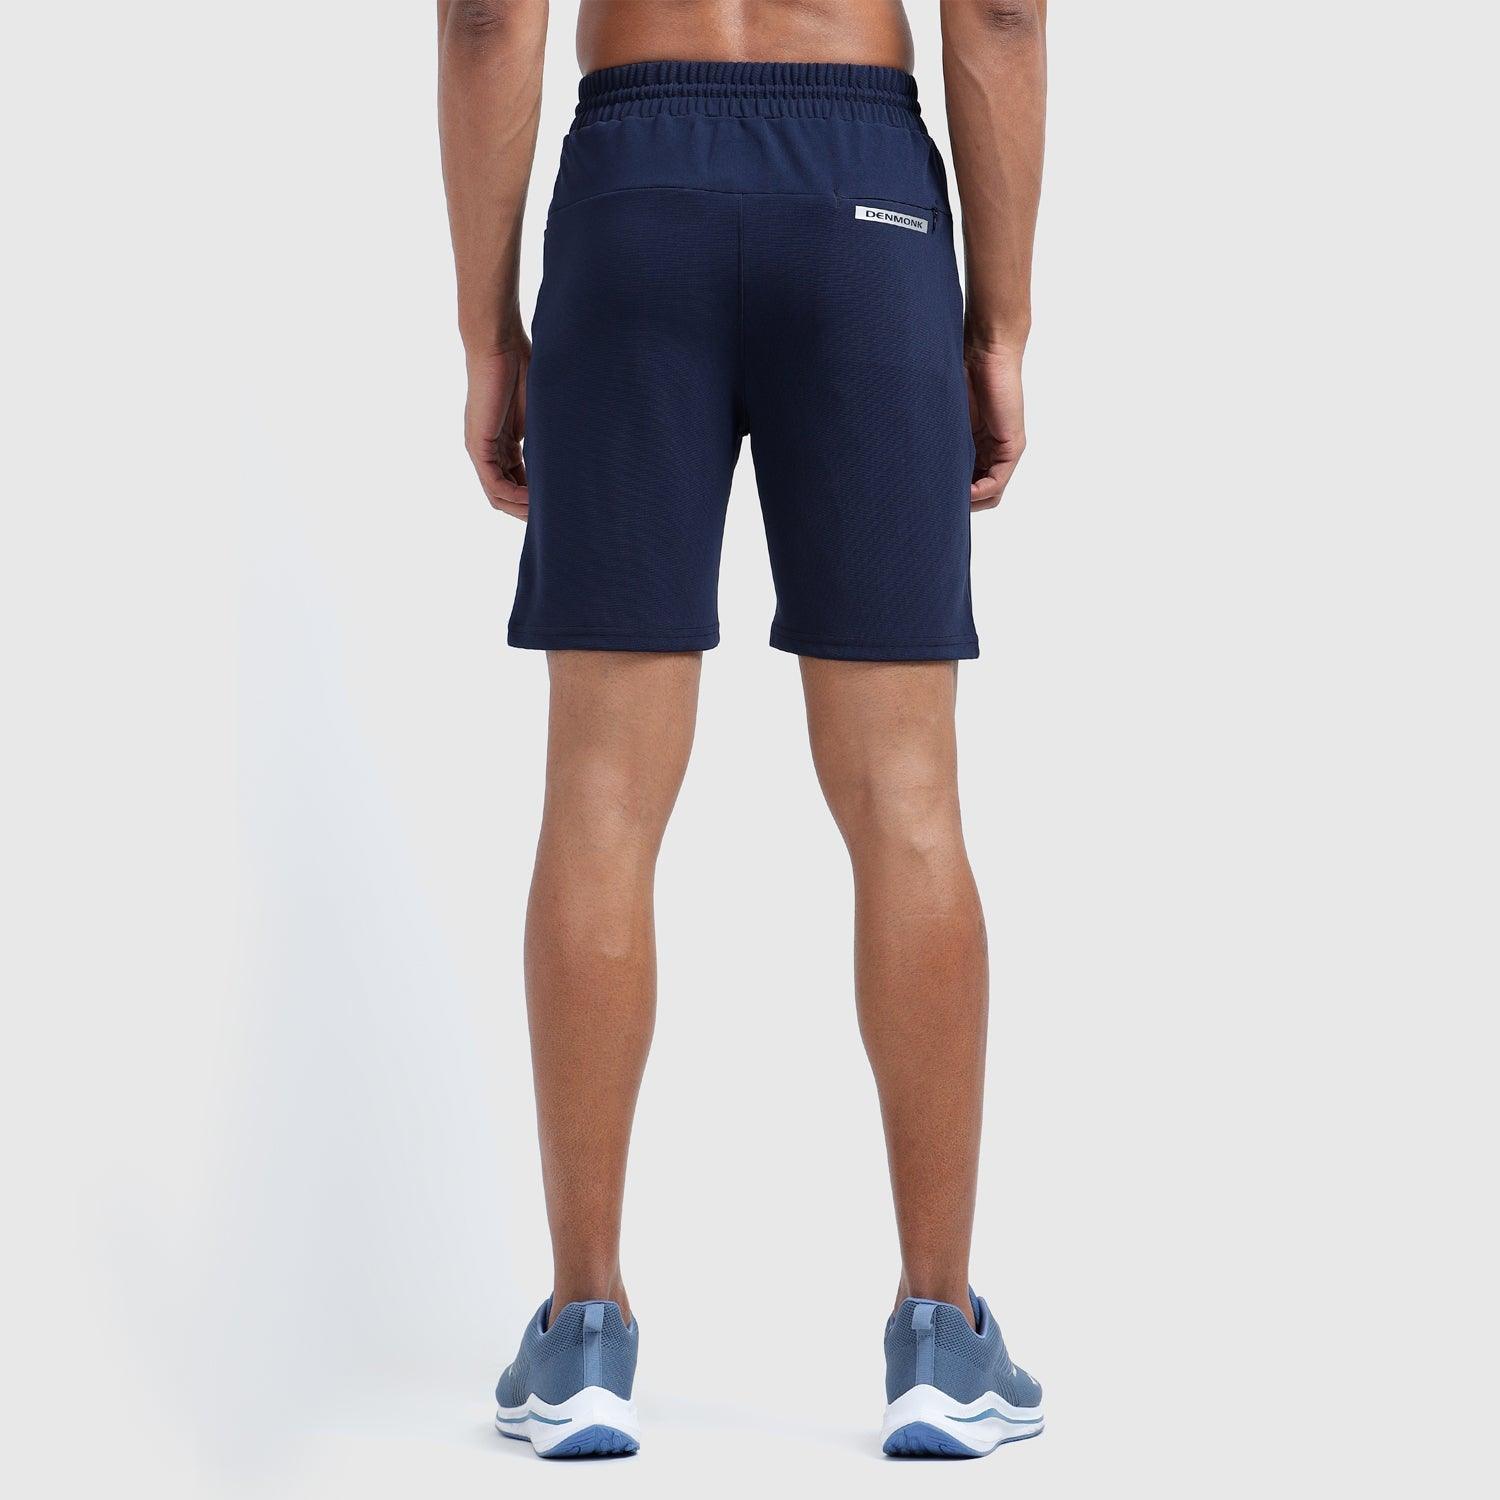 Denmonk's fashionable Retroglide Shorts midnight navy shorts for men will boost your level of gym fitness.